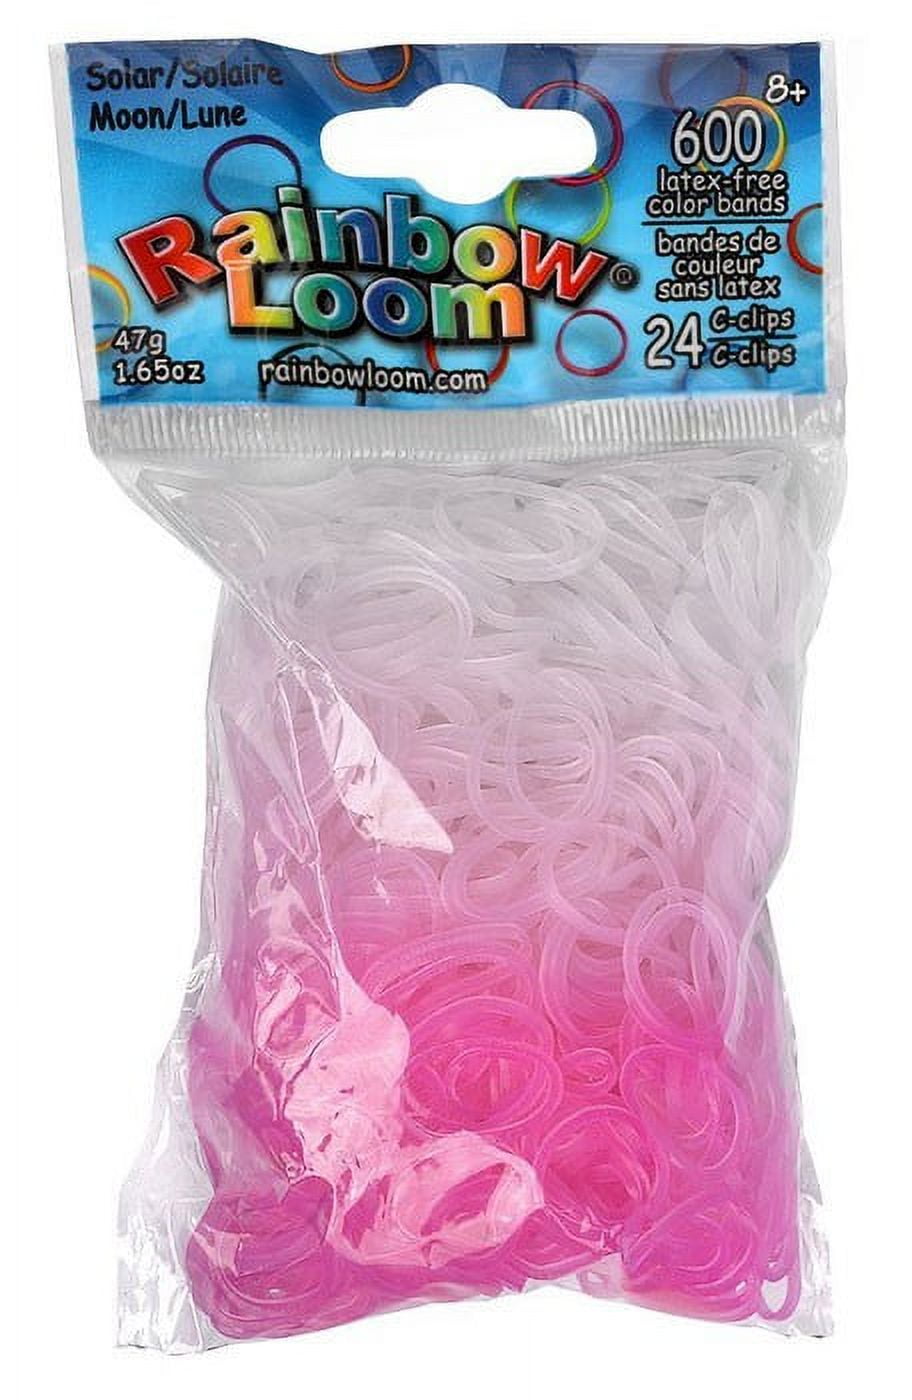 Rainbow Loom Solar UV Color Changing Moon Rubber Bands Refill Pack (600 ct)